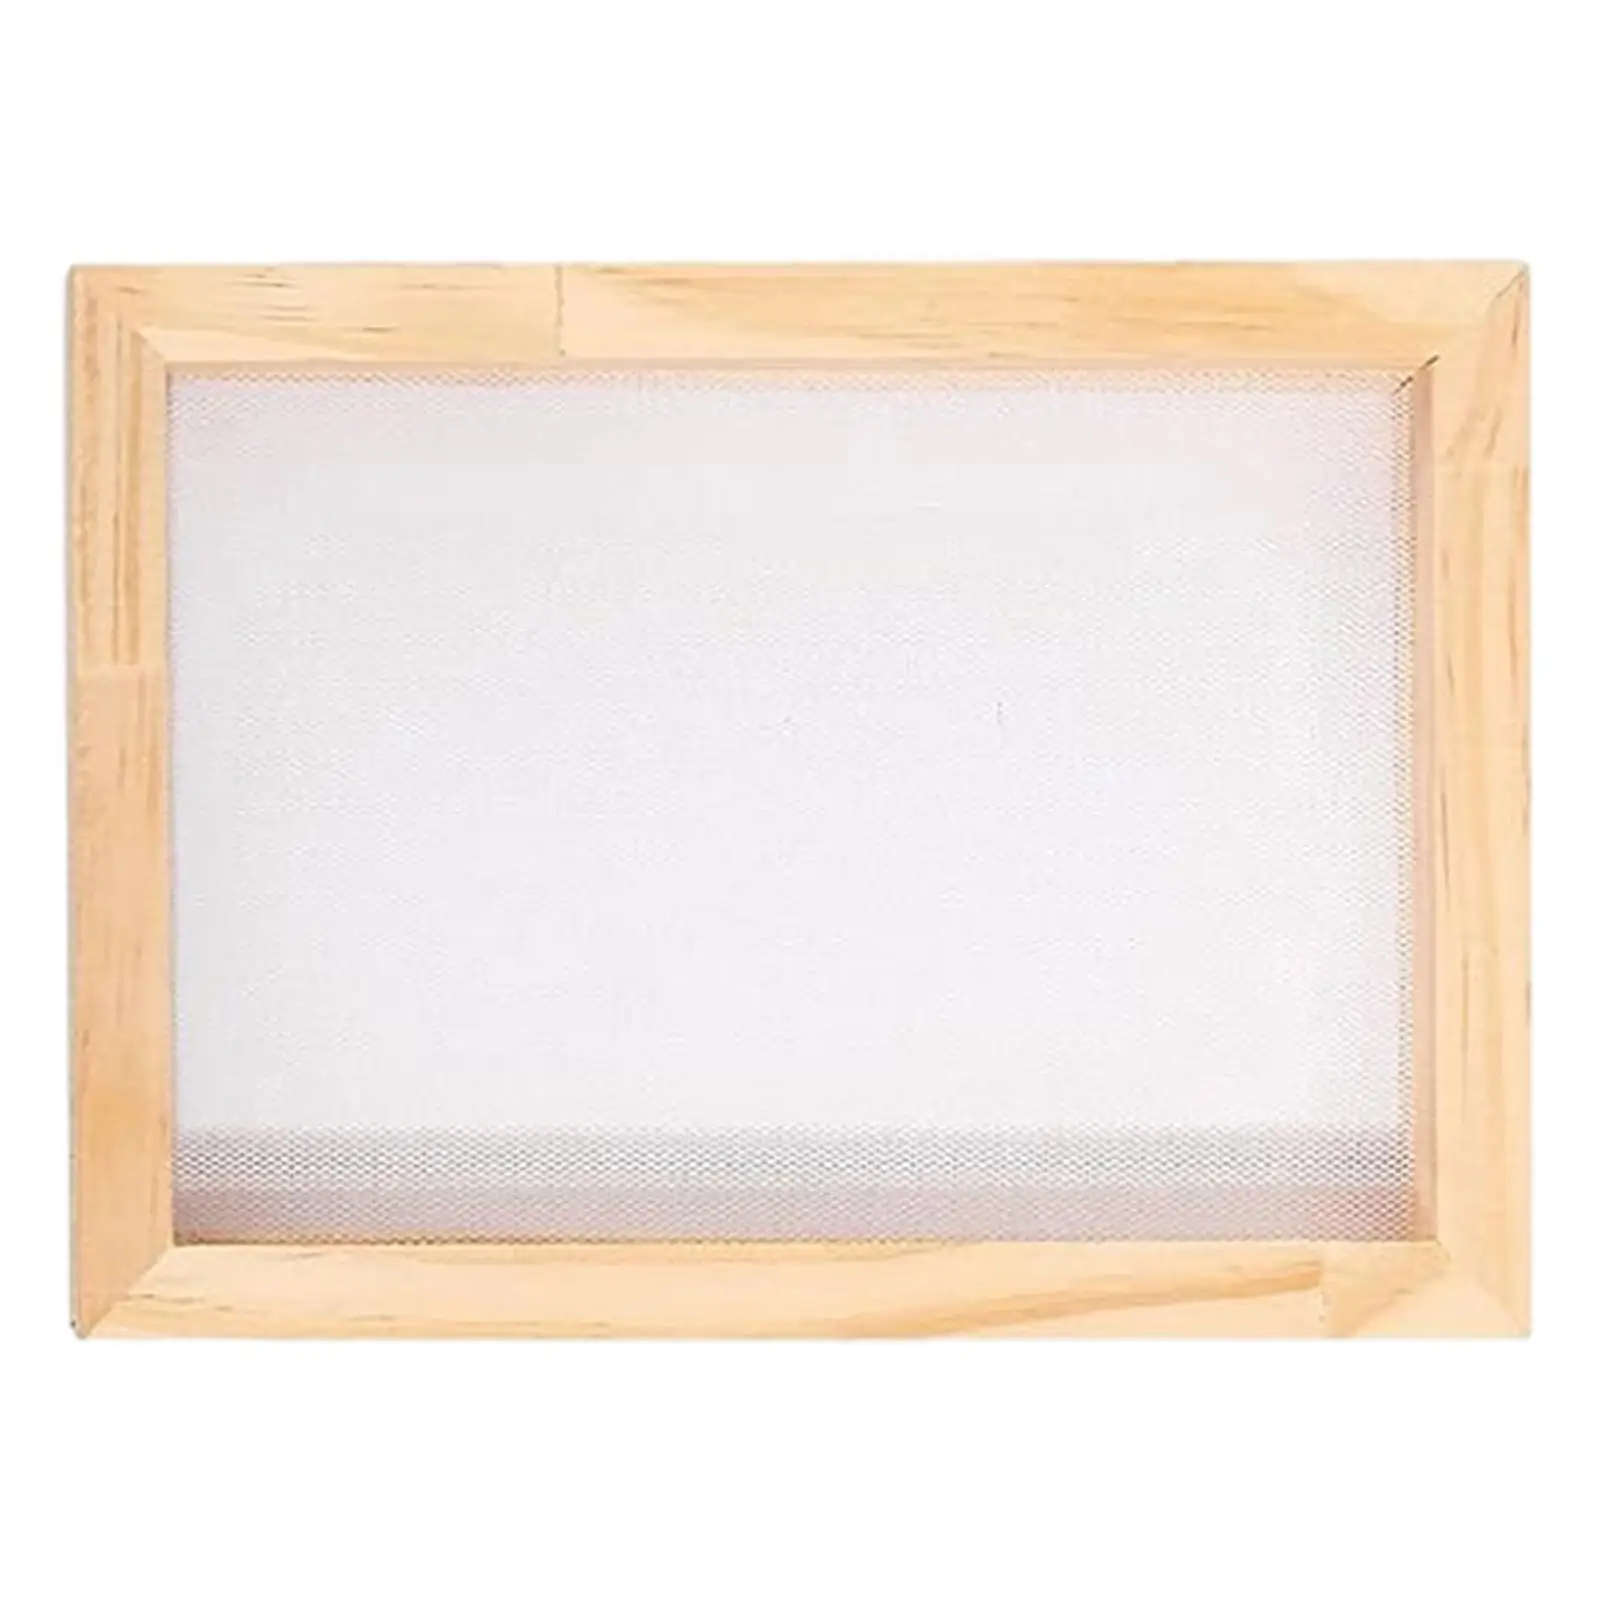 Paper Making Frame Screen Useful DIY Paper Crafts Papermaking Supplies Handmade Early Educational Learning Toy 3 Sizes Frame